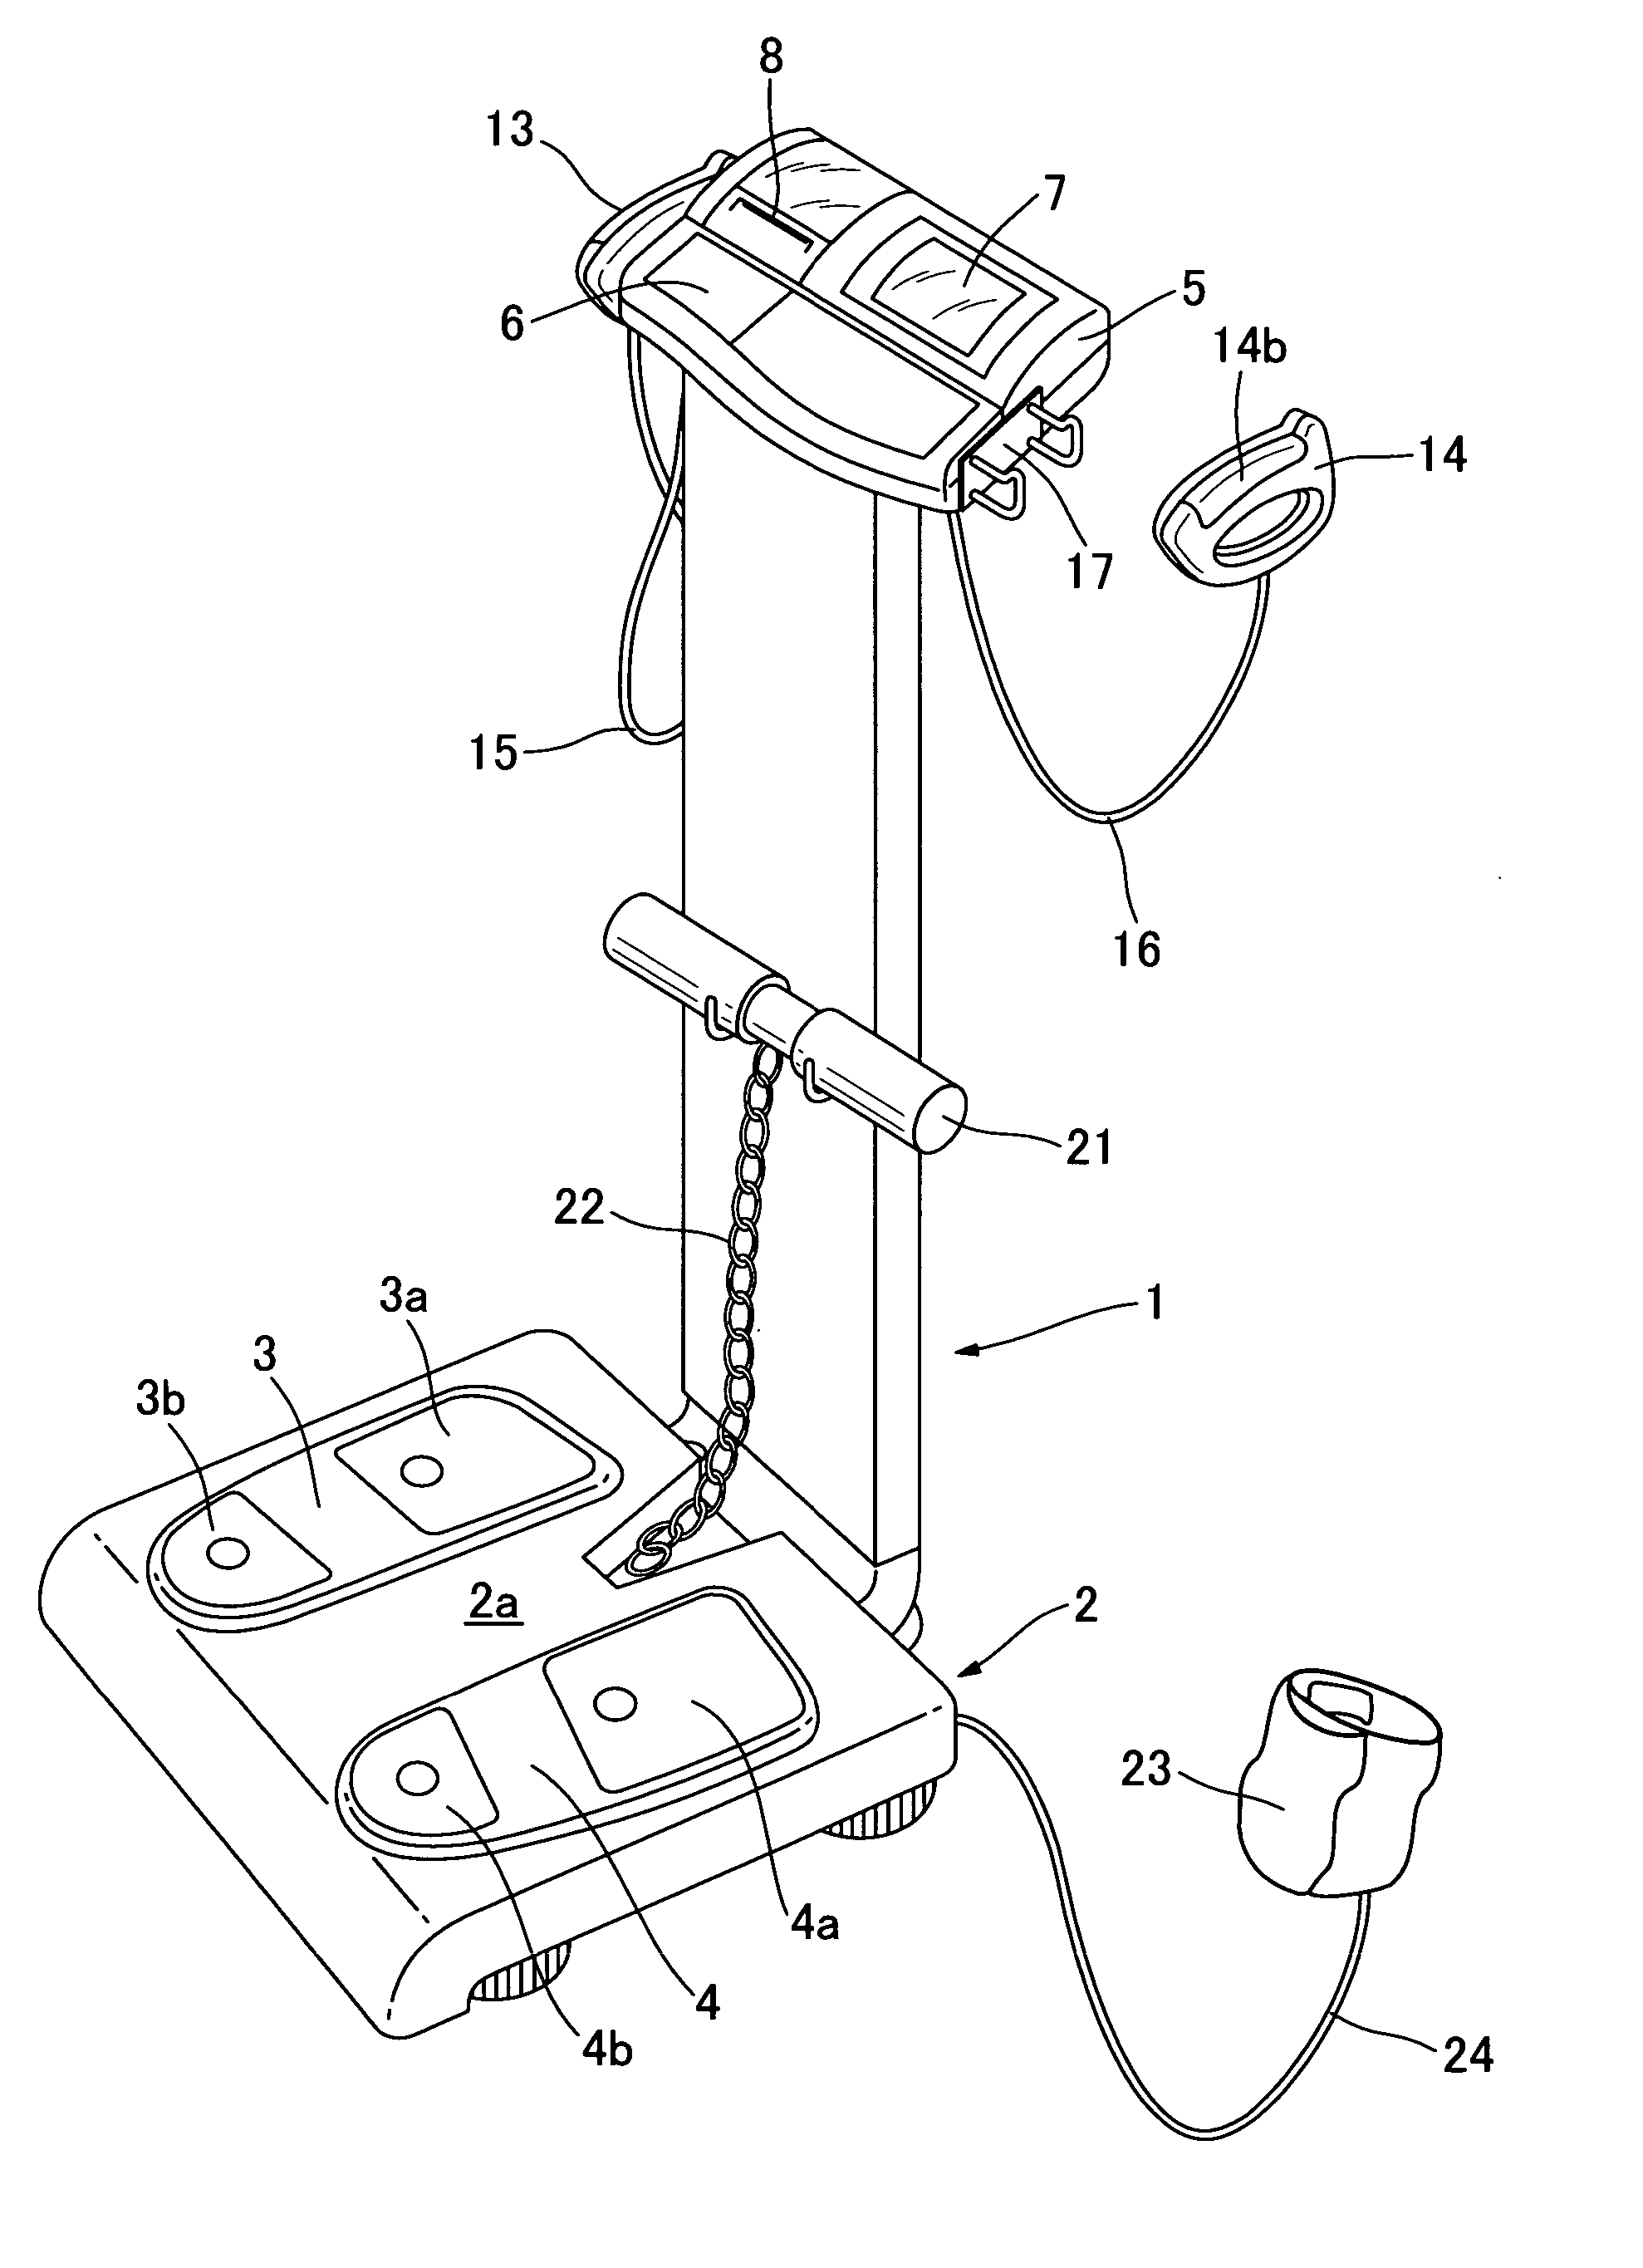 Muscle measuring device